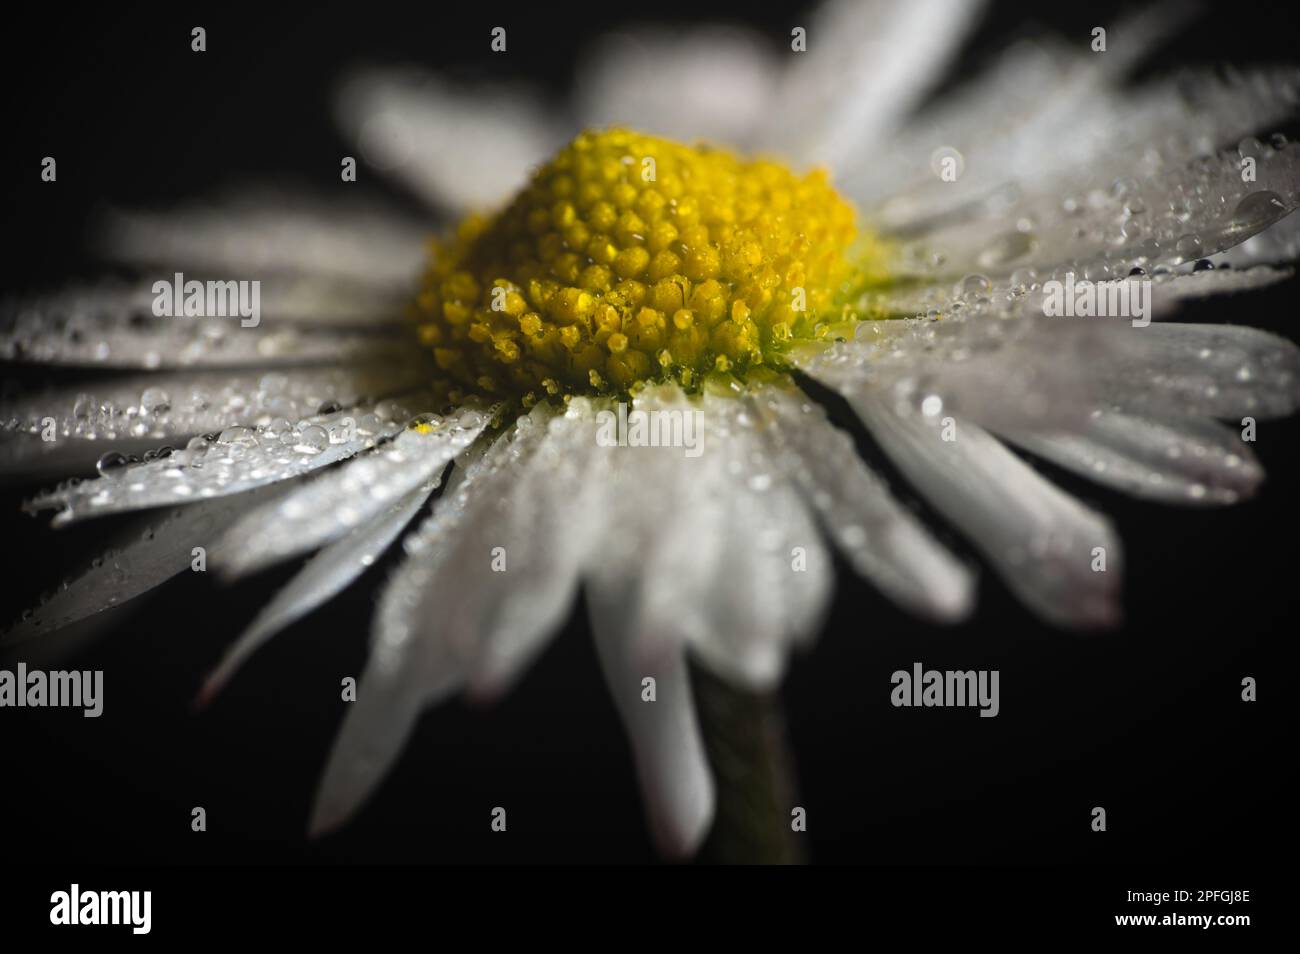 Close up daisy flower (Bellis perennis) photo. Extreme macro. Drops, droplets on white petals. Stock Photo